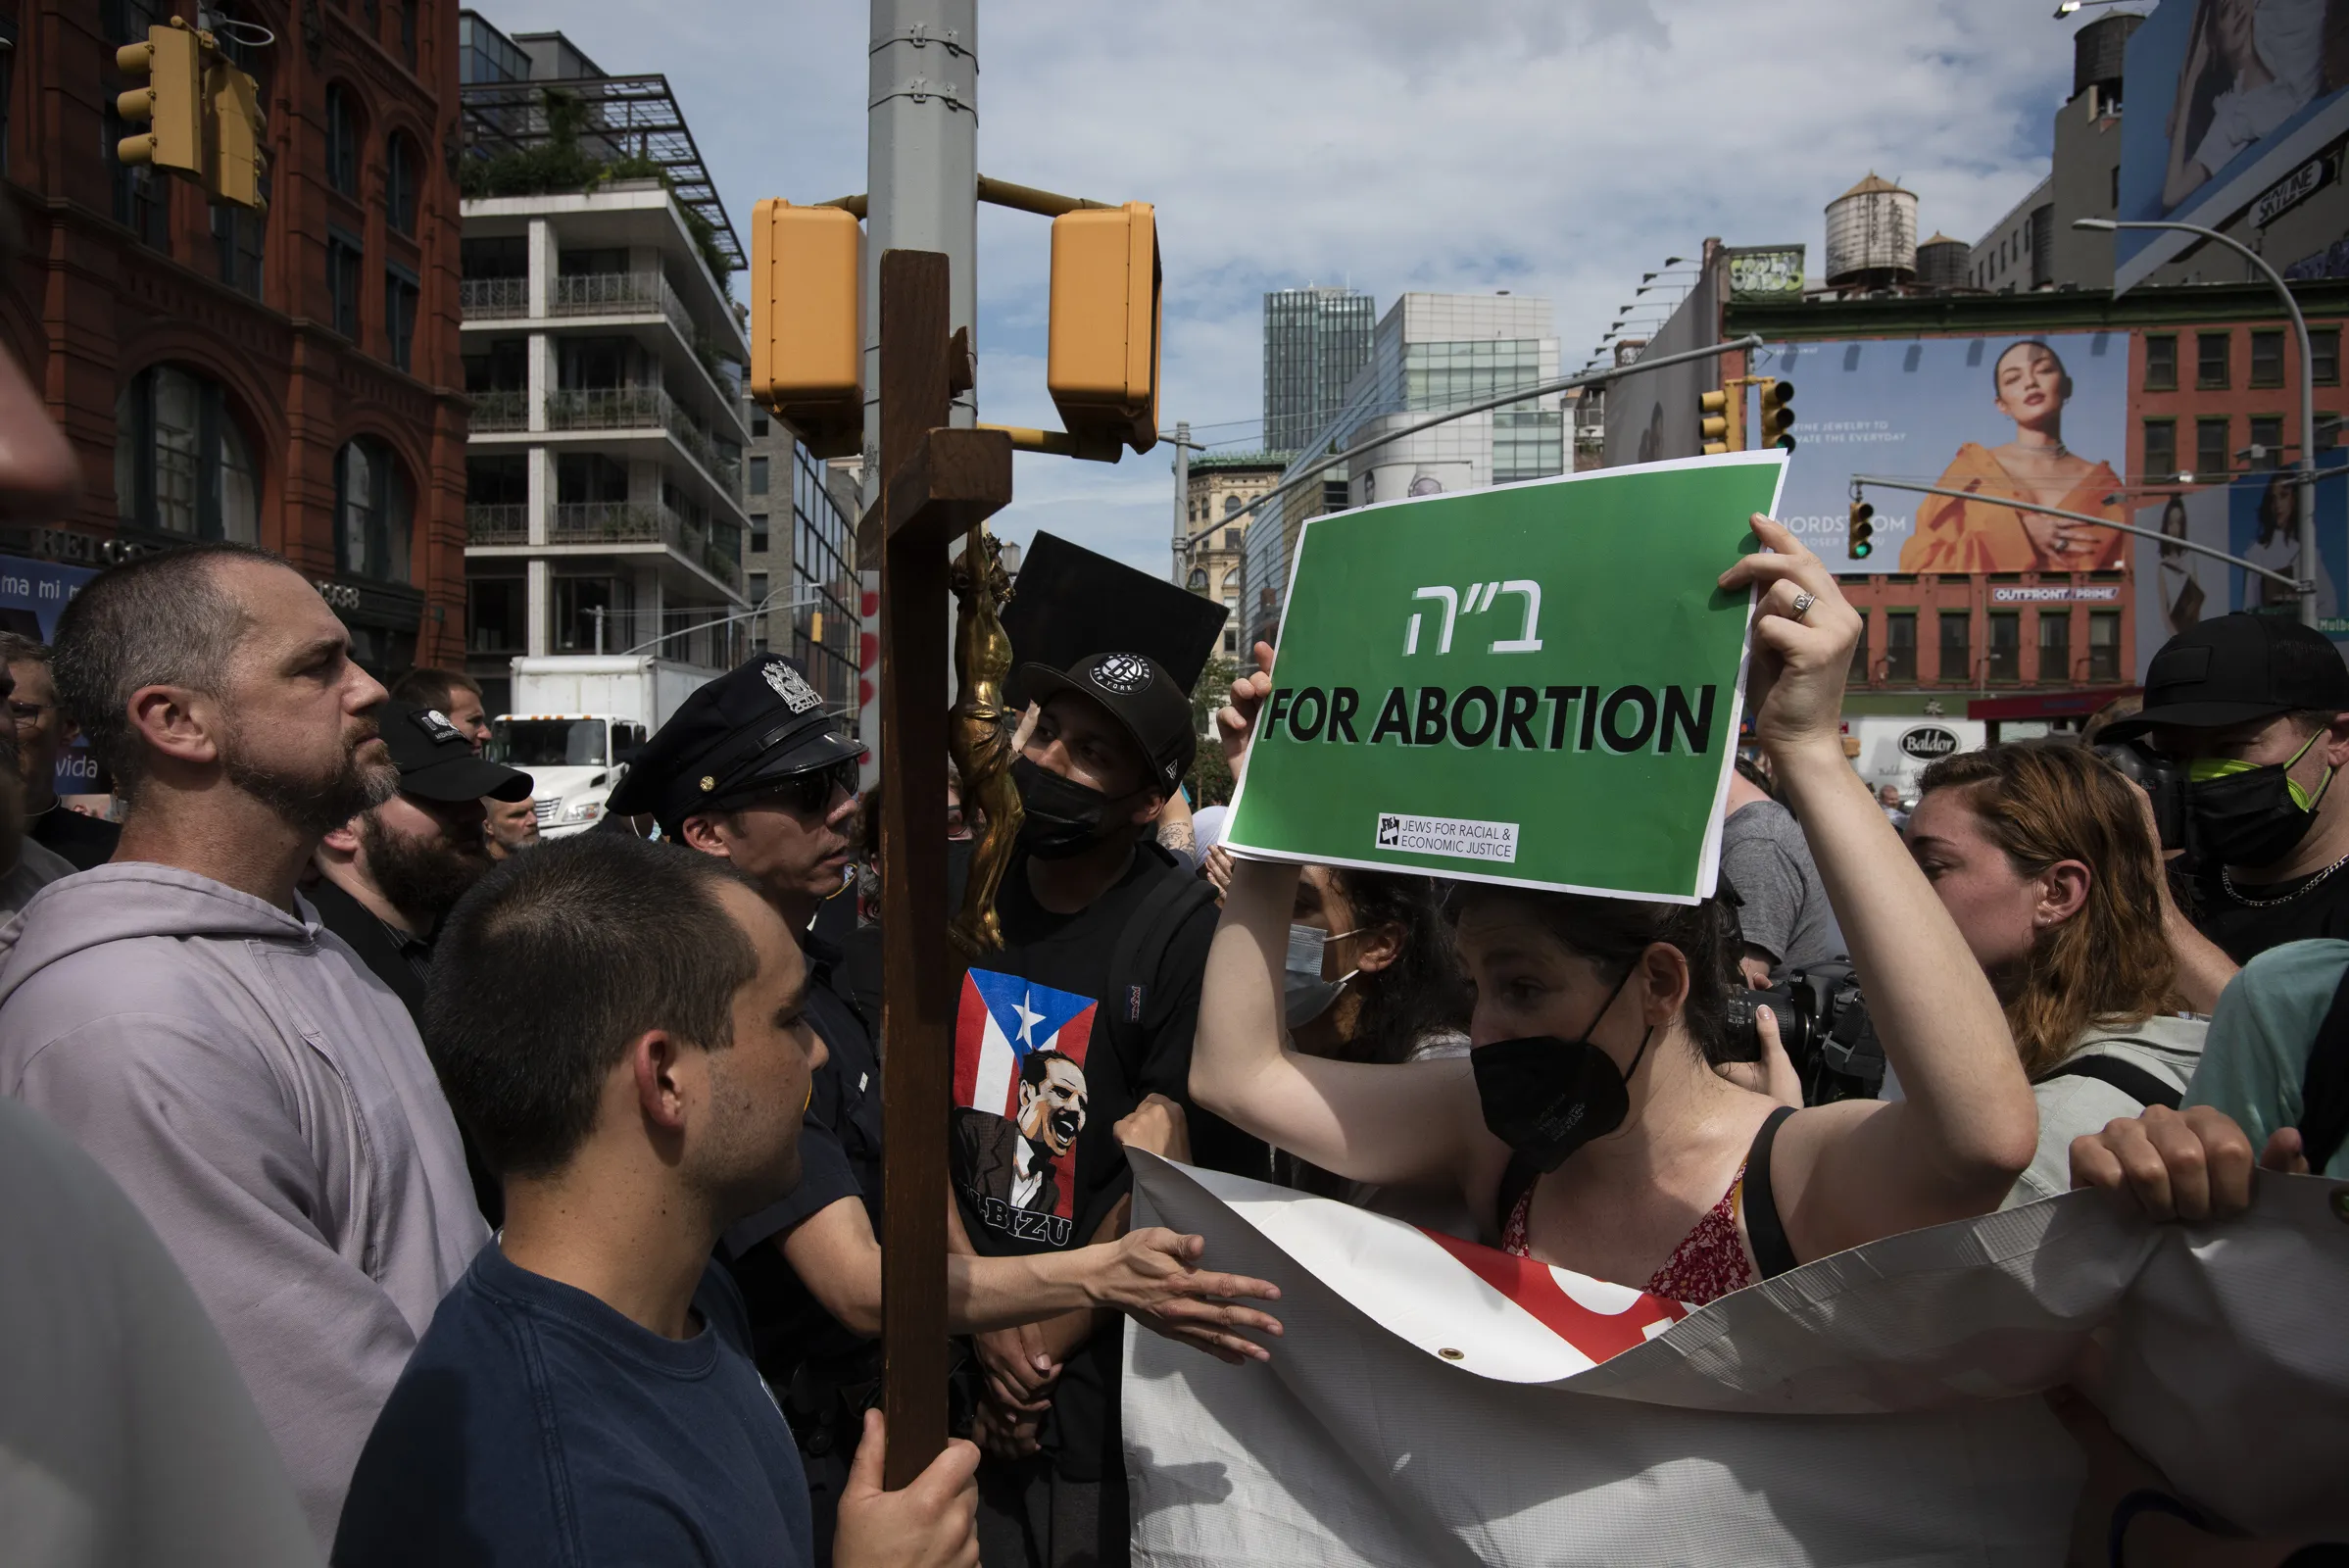 Father Fidelis Moscinski (far left, in gray robe), a well-known pro-life activist and priest of the Franciscan Friars of the Renewal (CFR), is seen during a tense standoff between pro-life and pro-abortion demonstrators in Lower Manhattan on July 2, 2022.?w=200&h=150